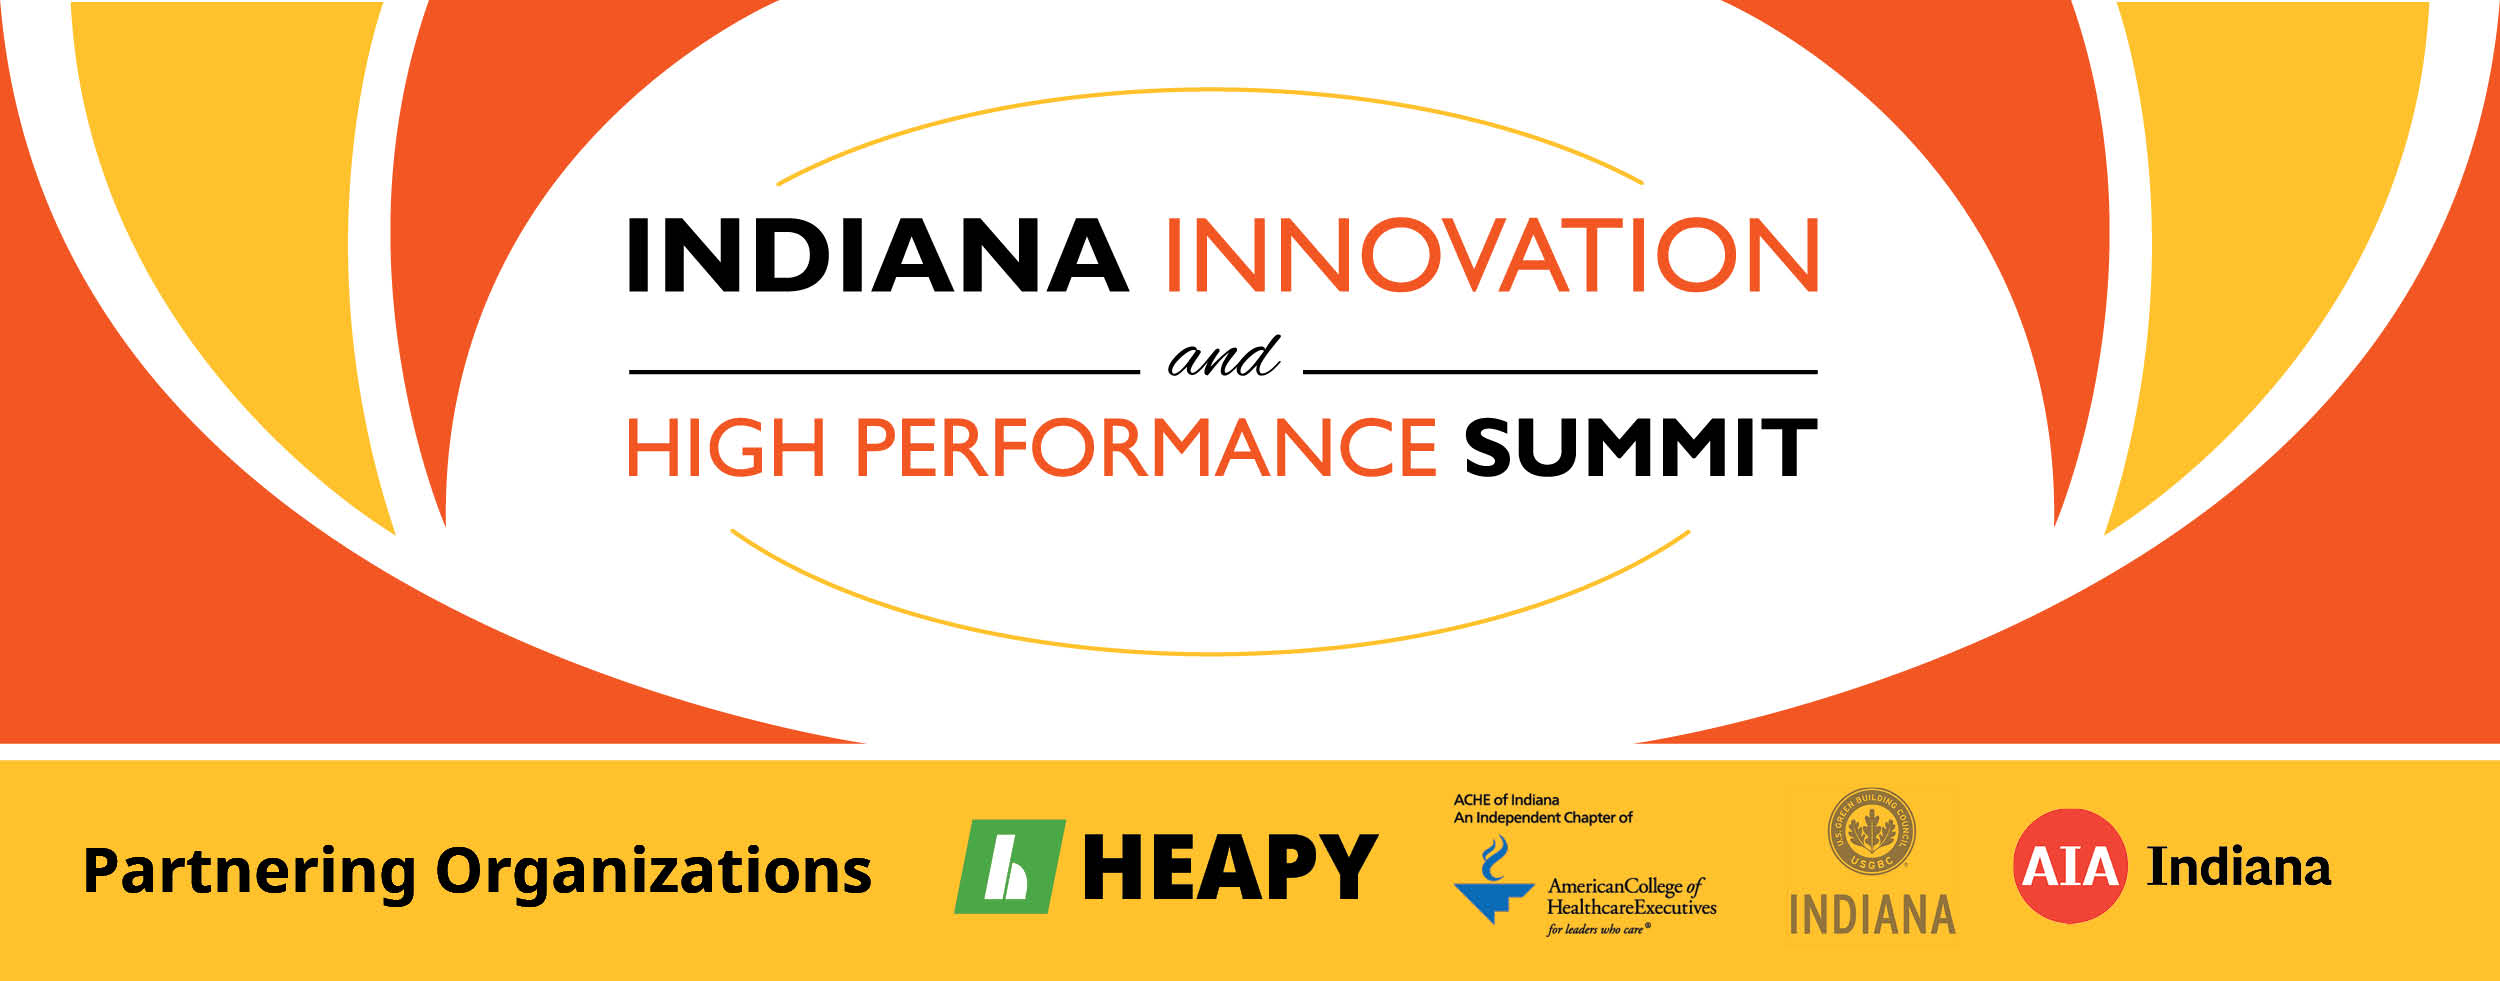 Indiana Innovation and High Performance Summit